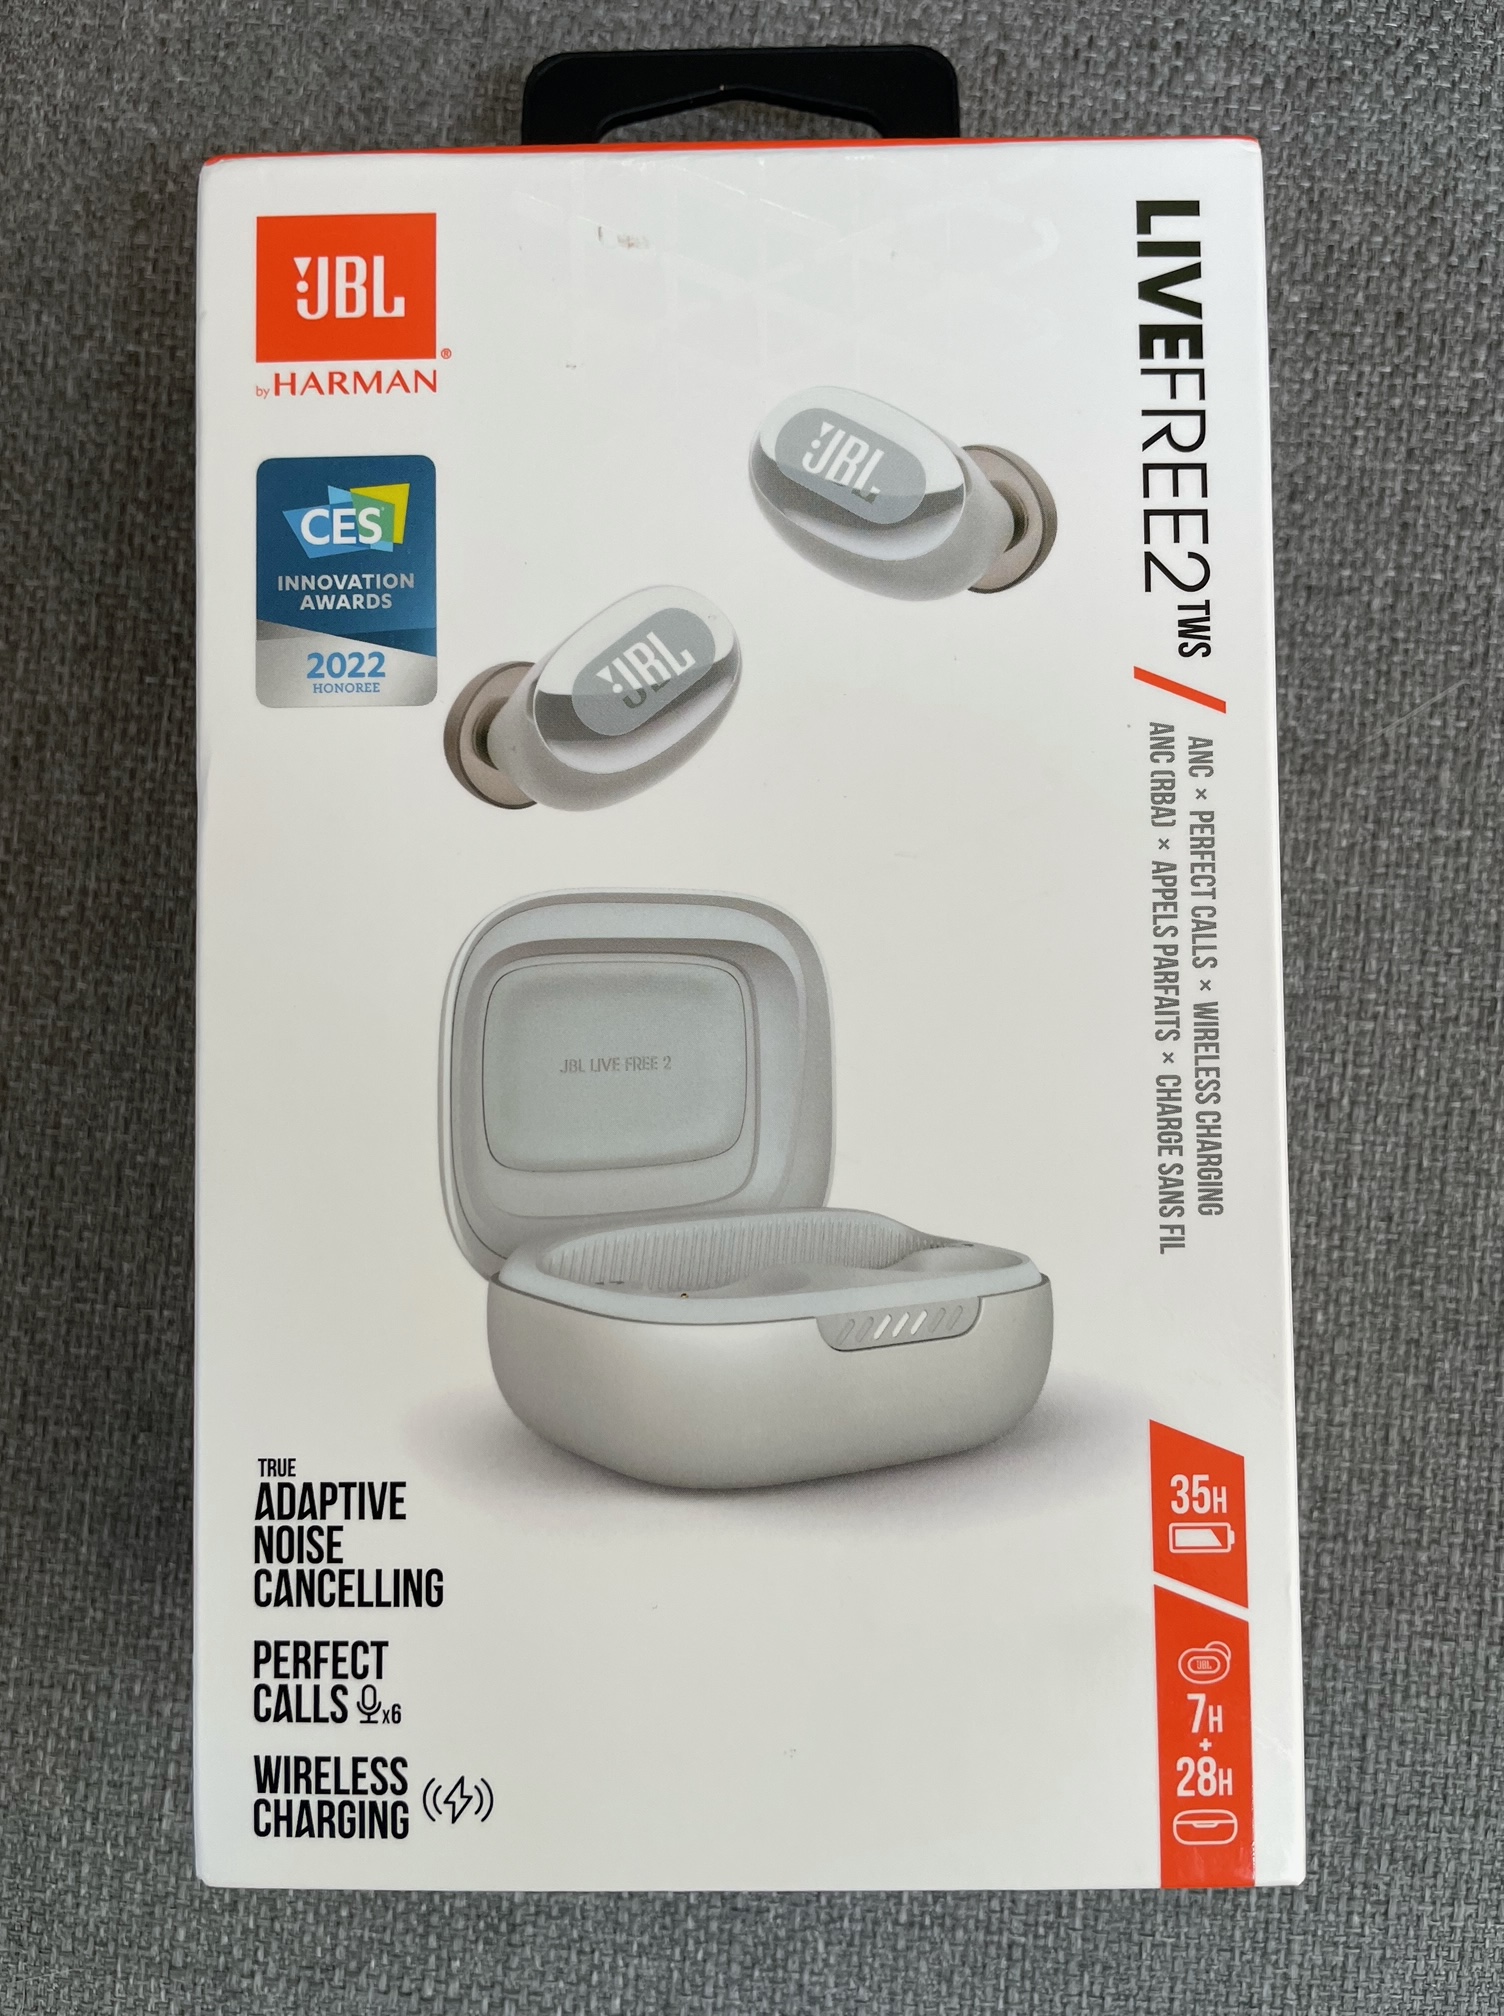 JBL Live Free 2 Bluetooth Earbuds review - Feature-packed, active noise